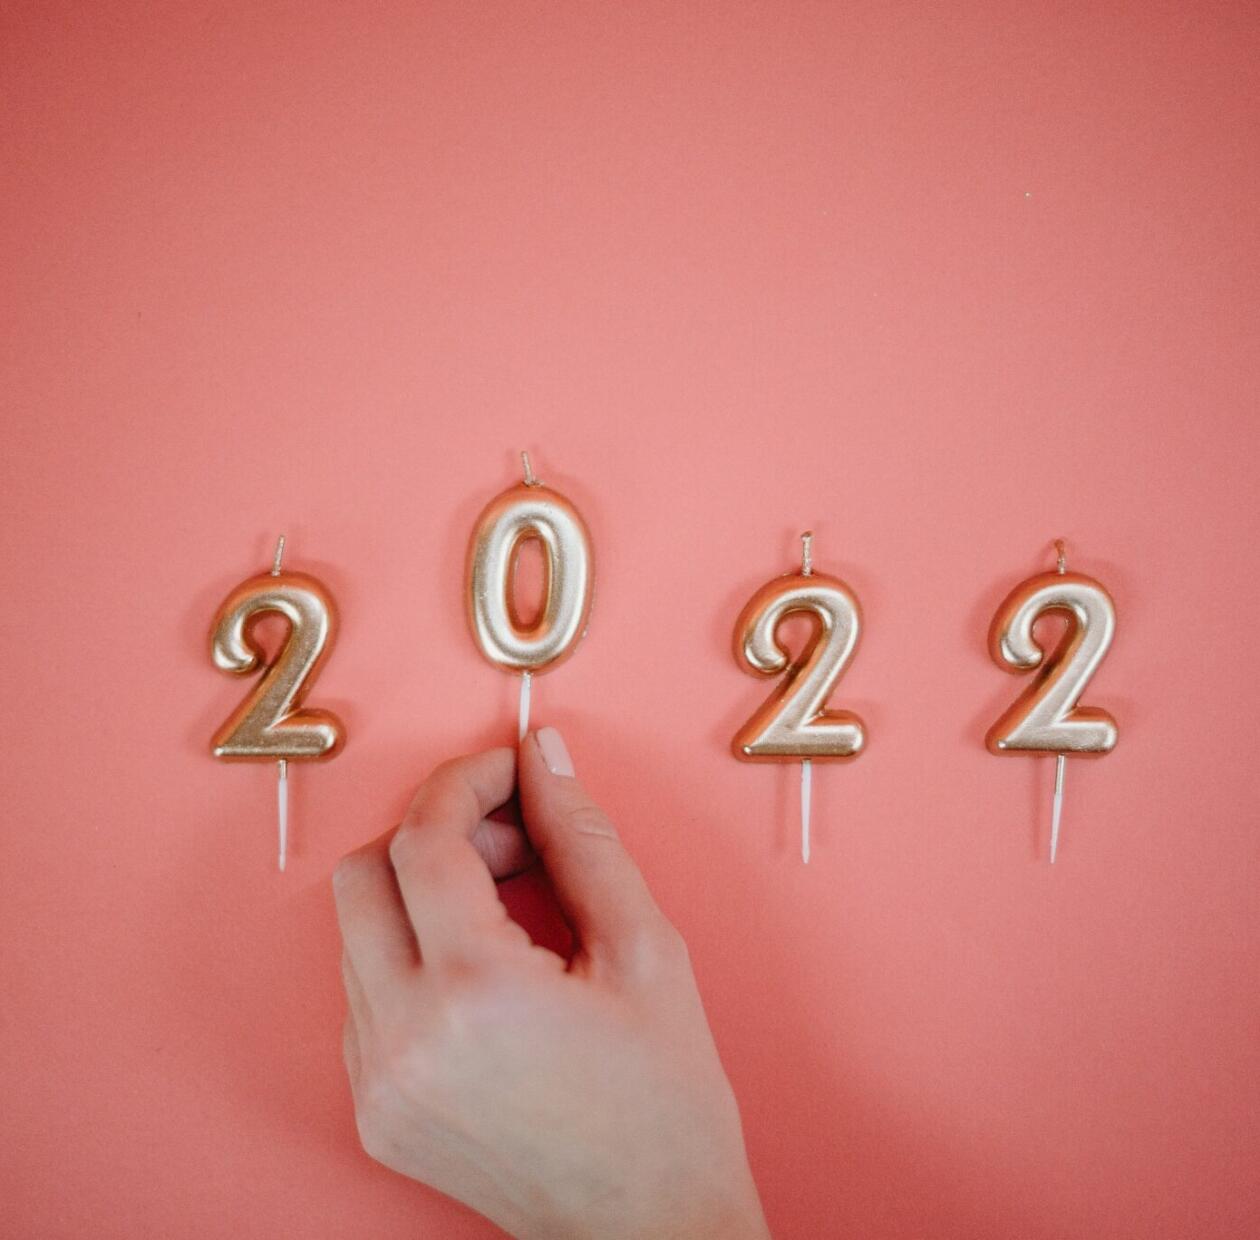 5 Ways Future-Thinking Agencies Are Preparing for 2022